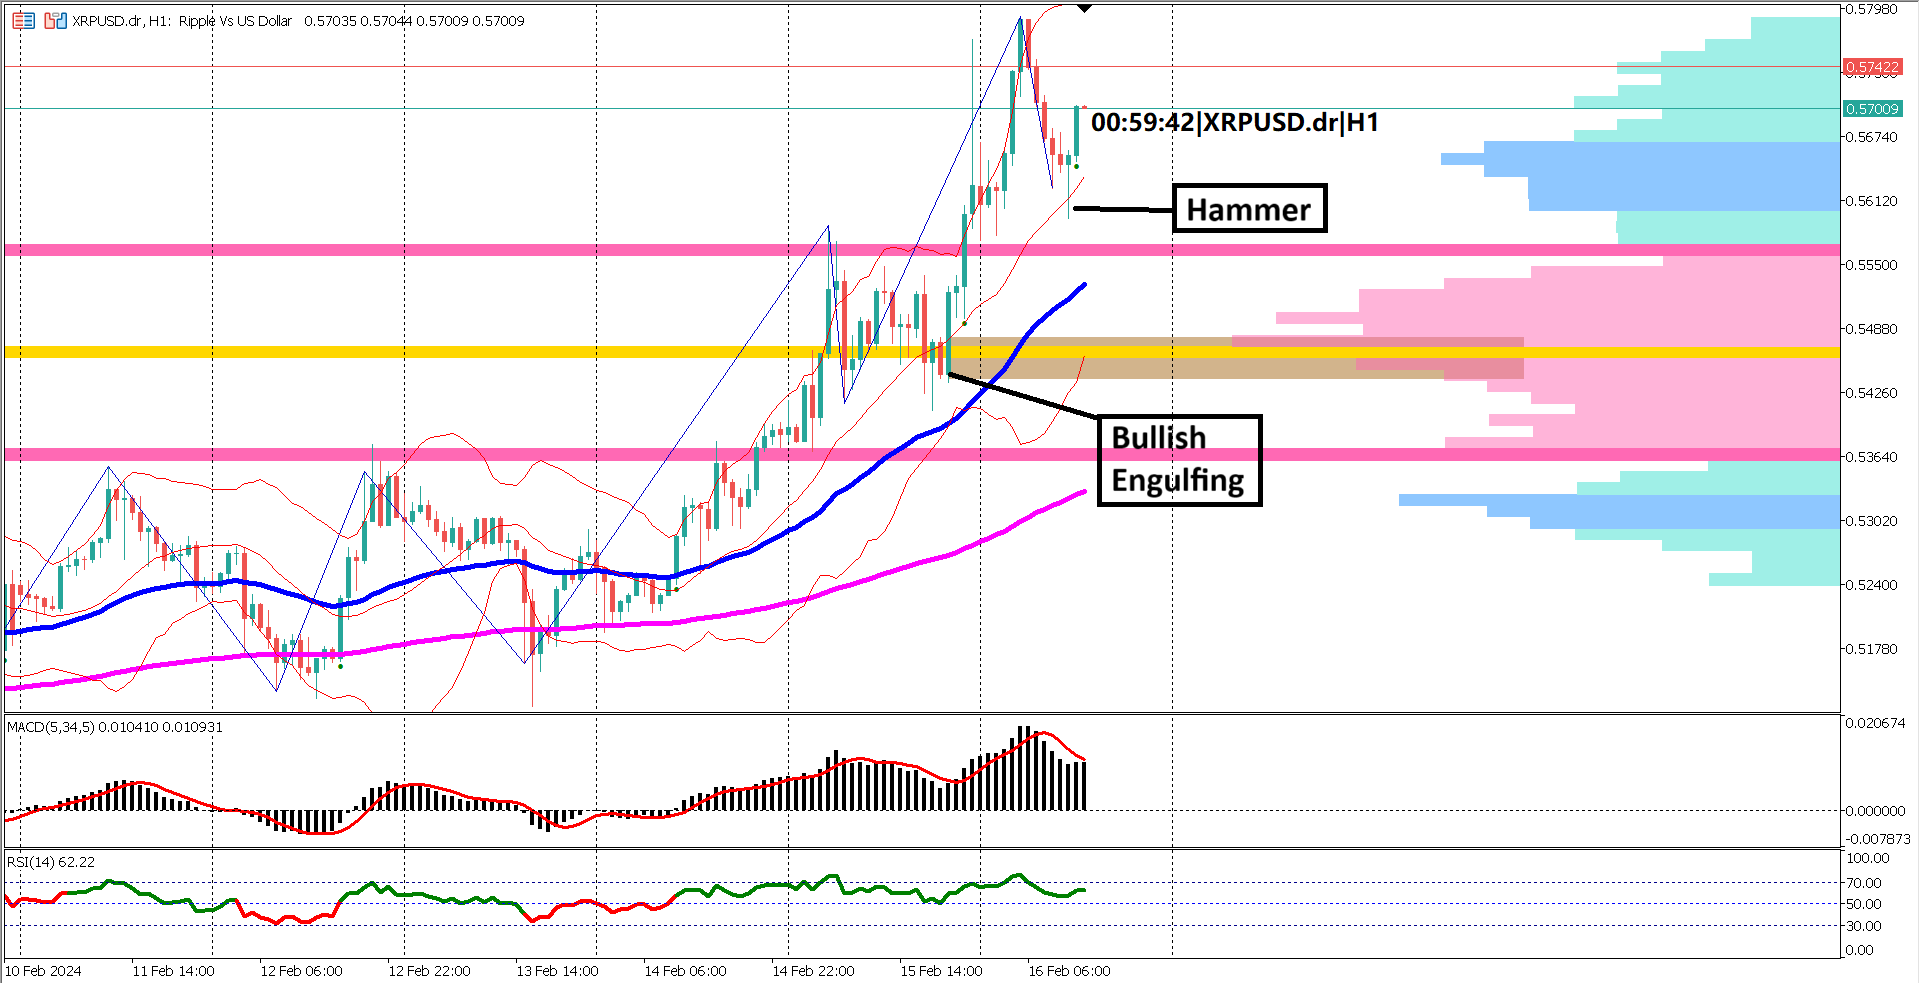  Technical Analysis: XRPUSD Finds Support on Bollinger Band Mid-Band, Signals Bullish Continuation